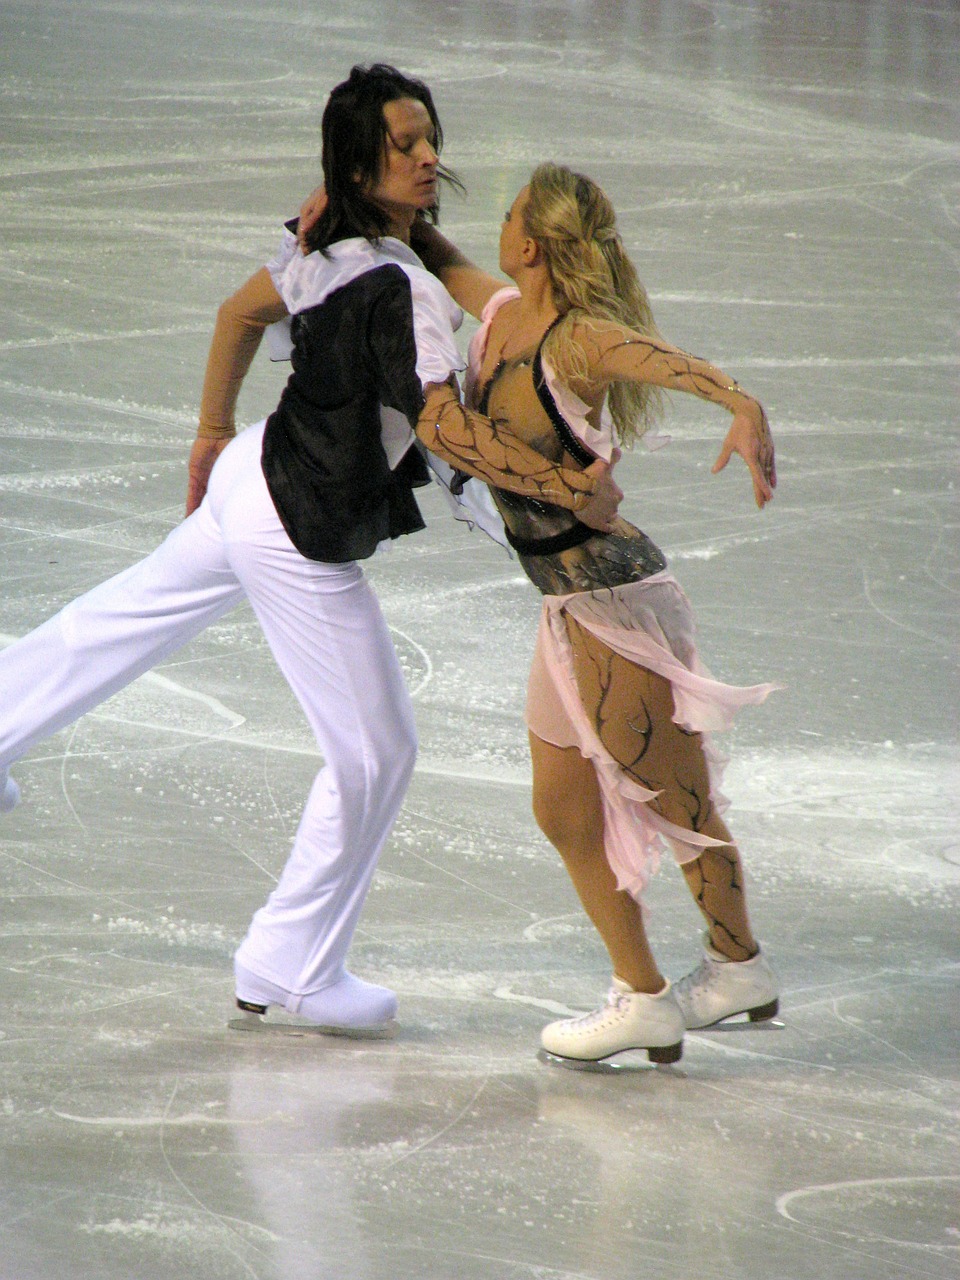 ice skating dancing competition free photo